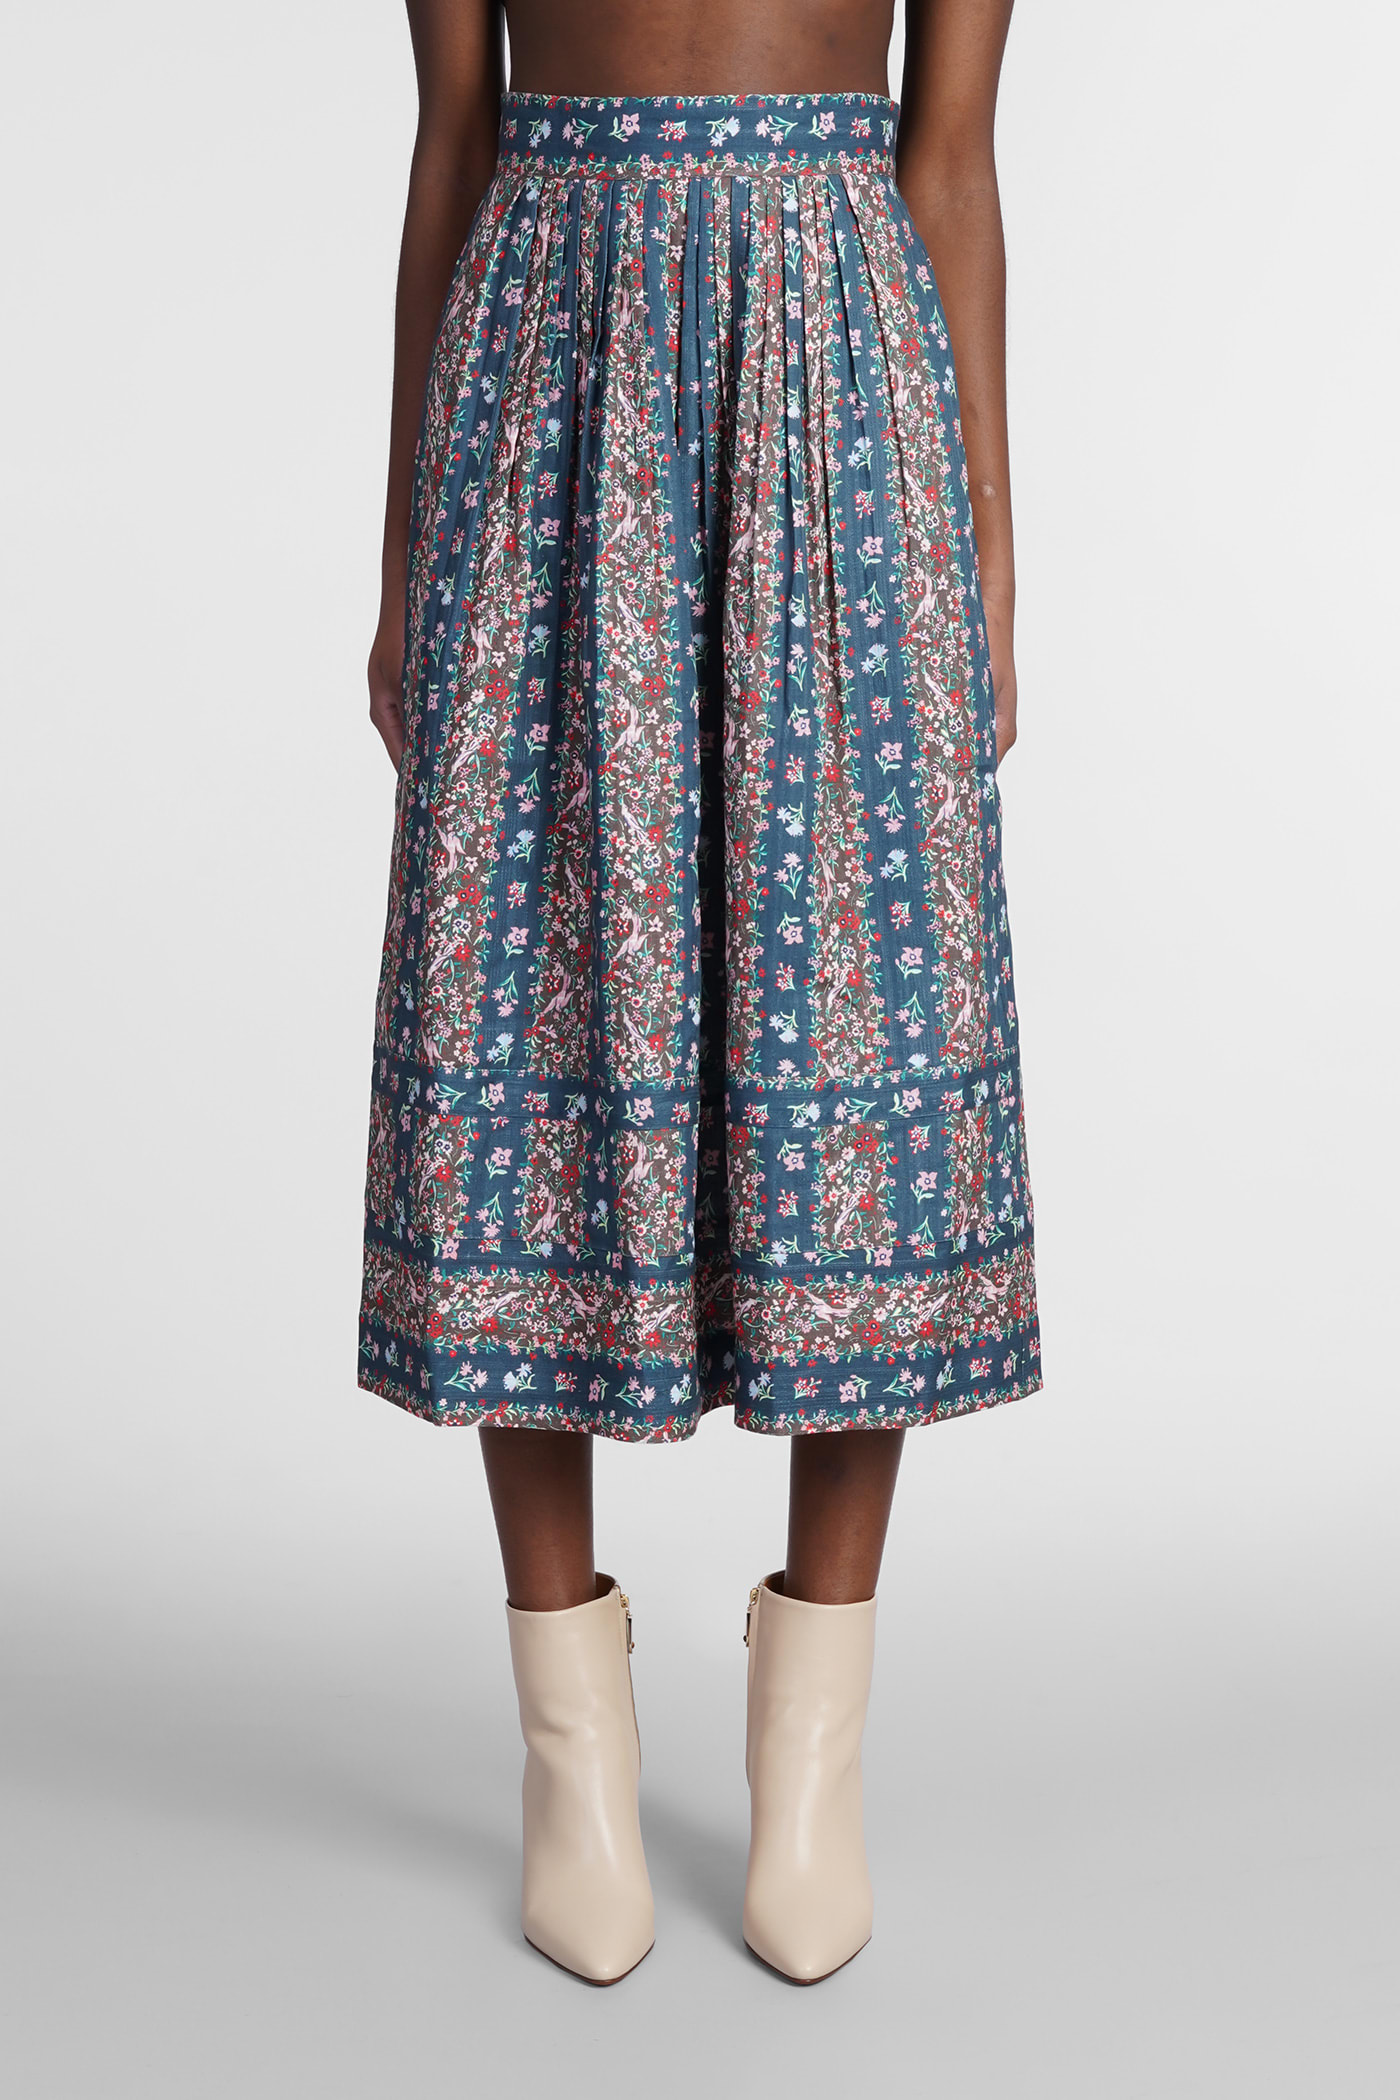 SEE BY CHLOÉ SKIRT IN MULTICOLOR COTTON